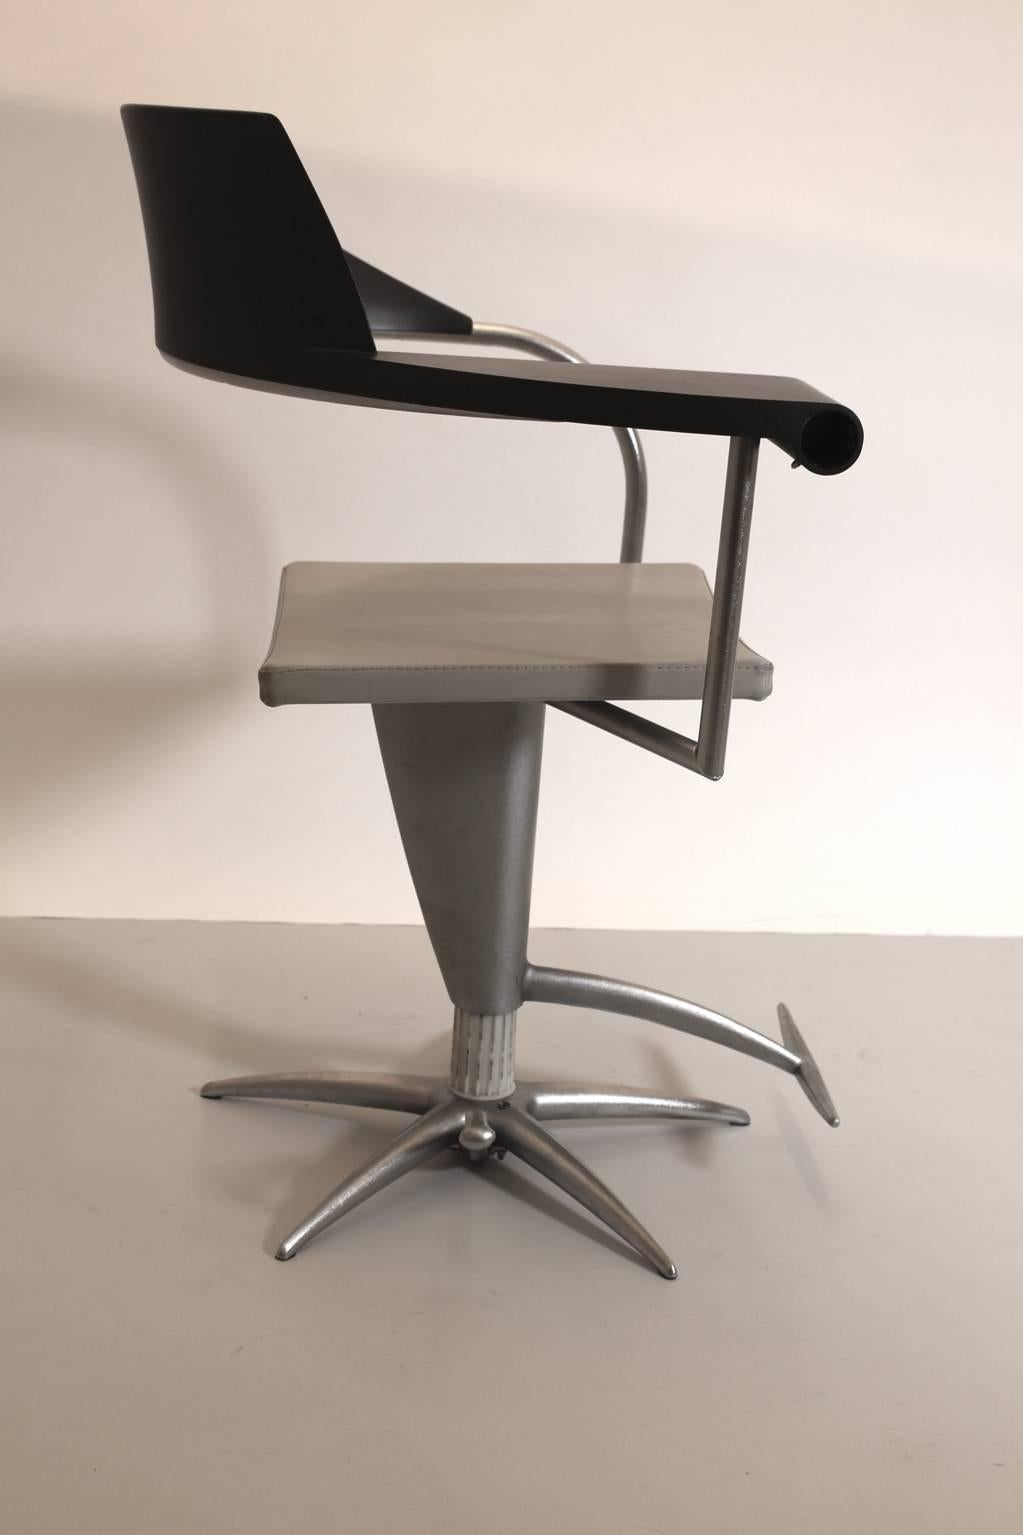 Postmodern vintage swivel armchair or desk chair from plastic, aluminum and steel in black and silver by Philippe Starck 1980s. 
The curved armrests flow into the seat and you can find one hidden ashtray.
Probably this armchair was used in a hair